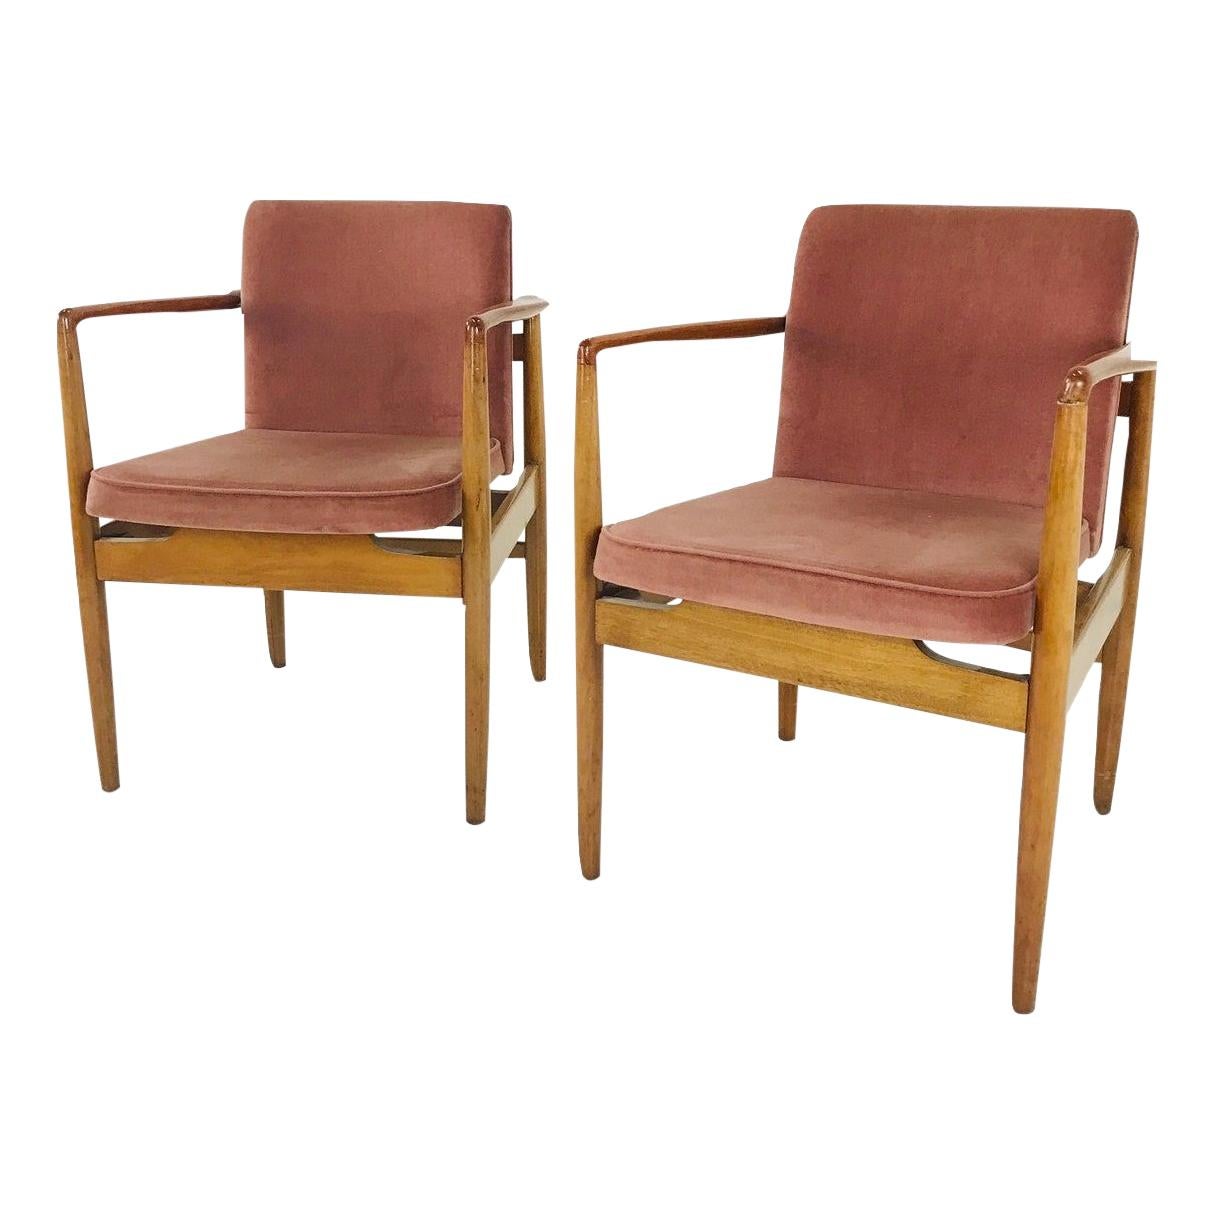 Pair of Modern Wood Armchairs with Sienna Mohair